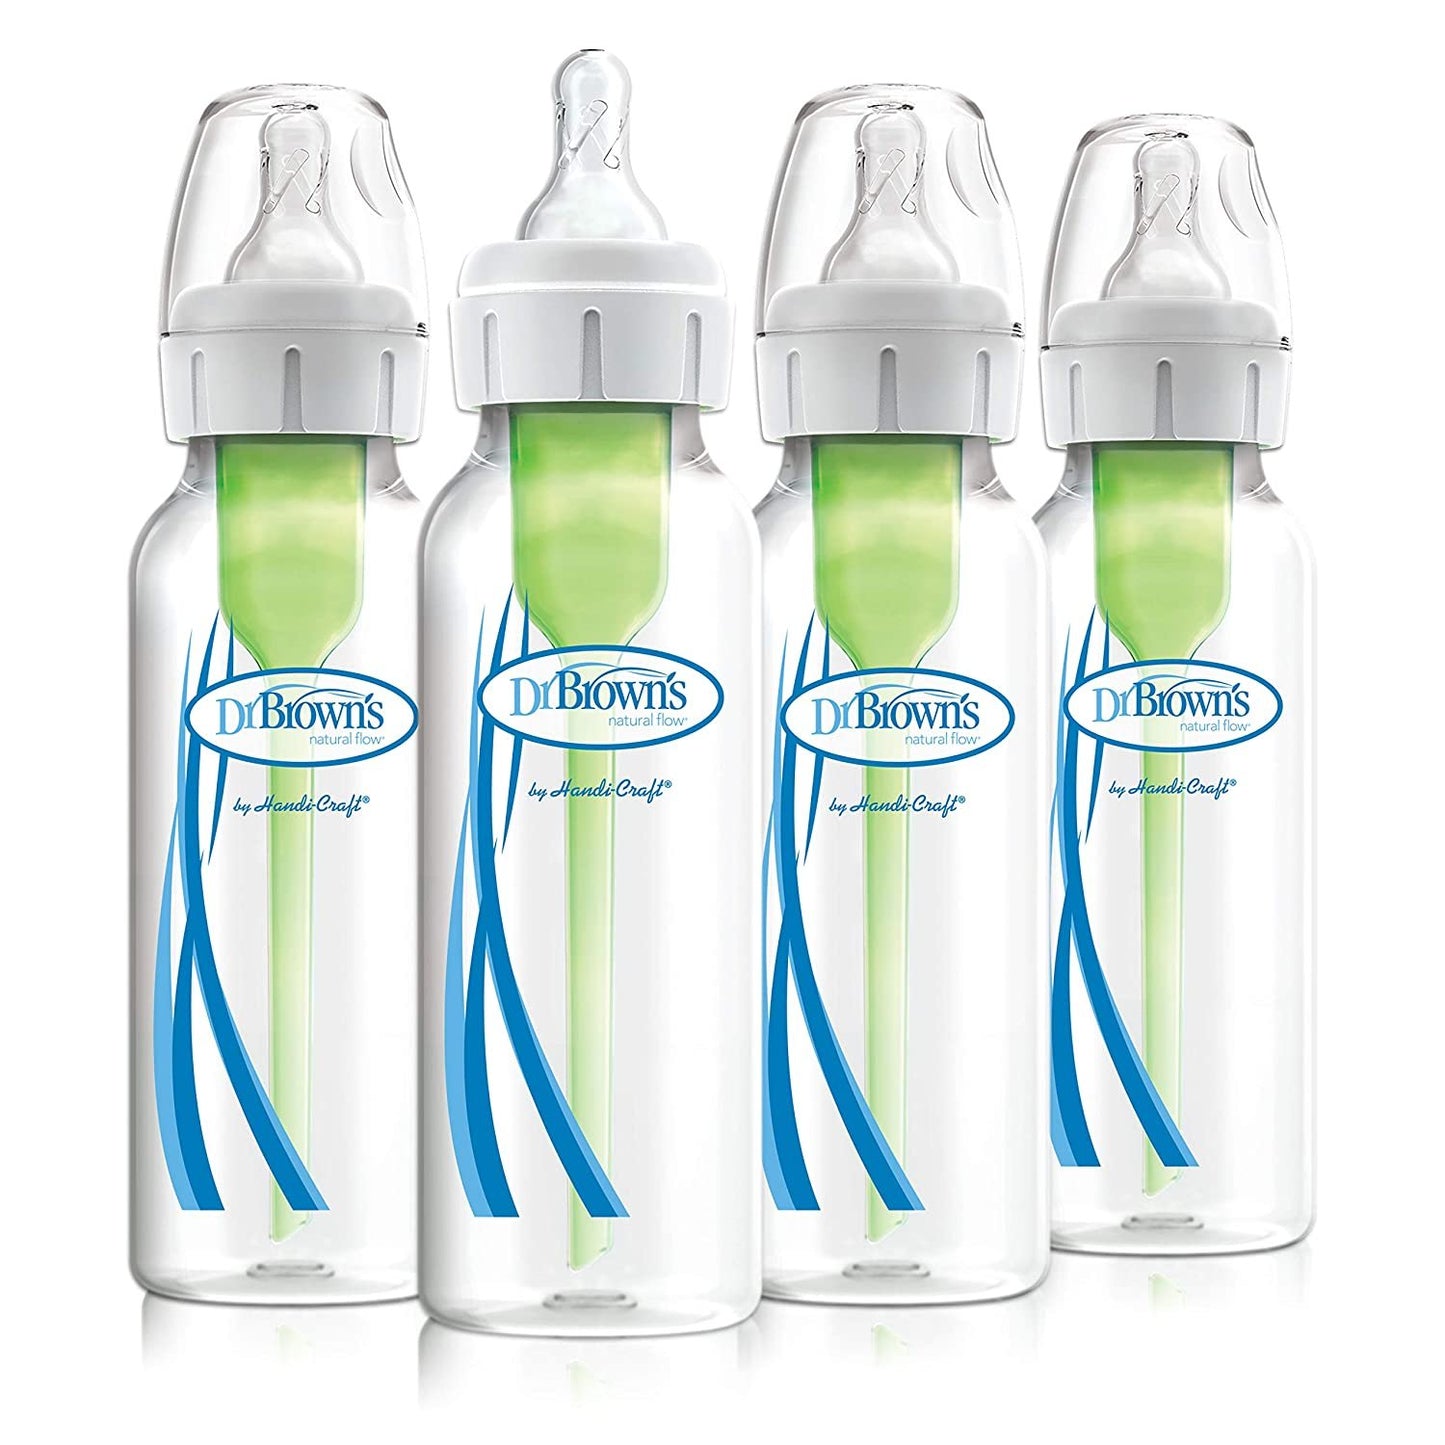 Dr. Brown's Baby Bottle, Options+ Anti-Colic Narrow Bottle, 8 Ounce (Pack of 4)